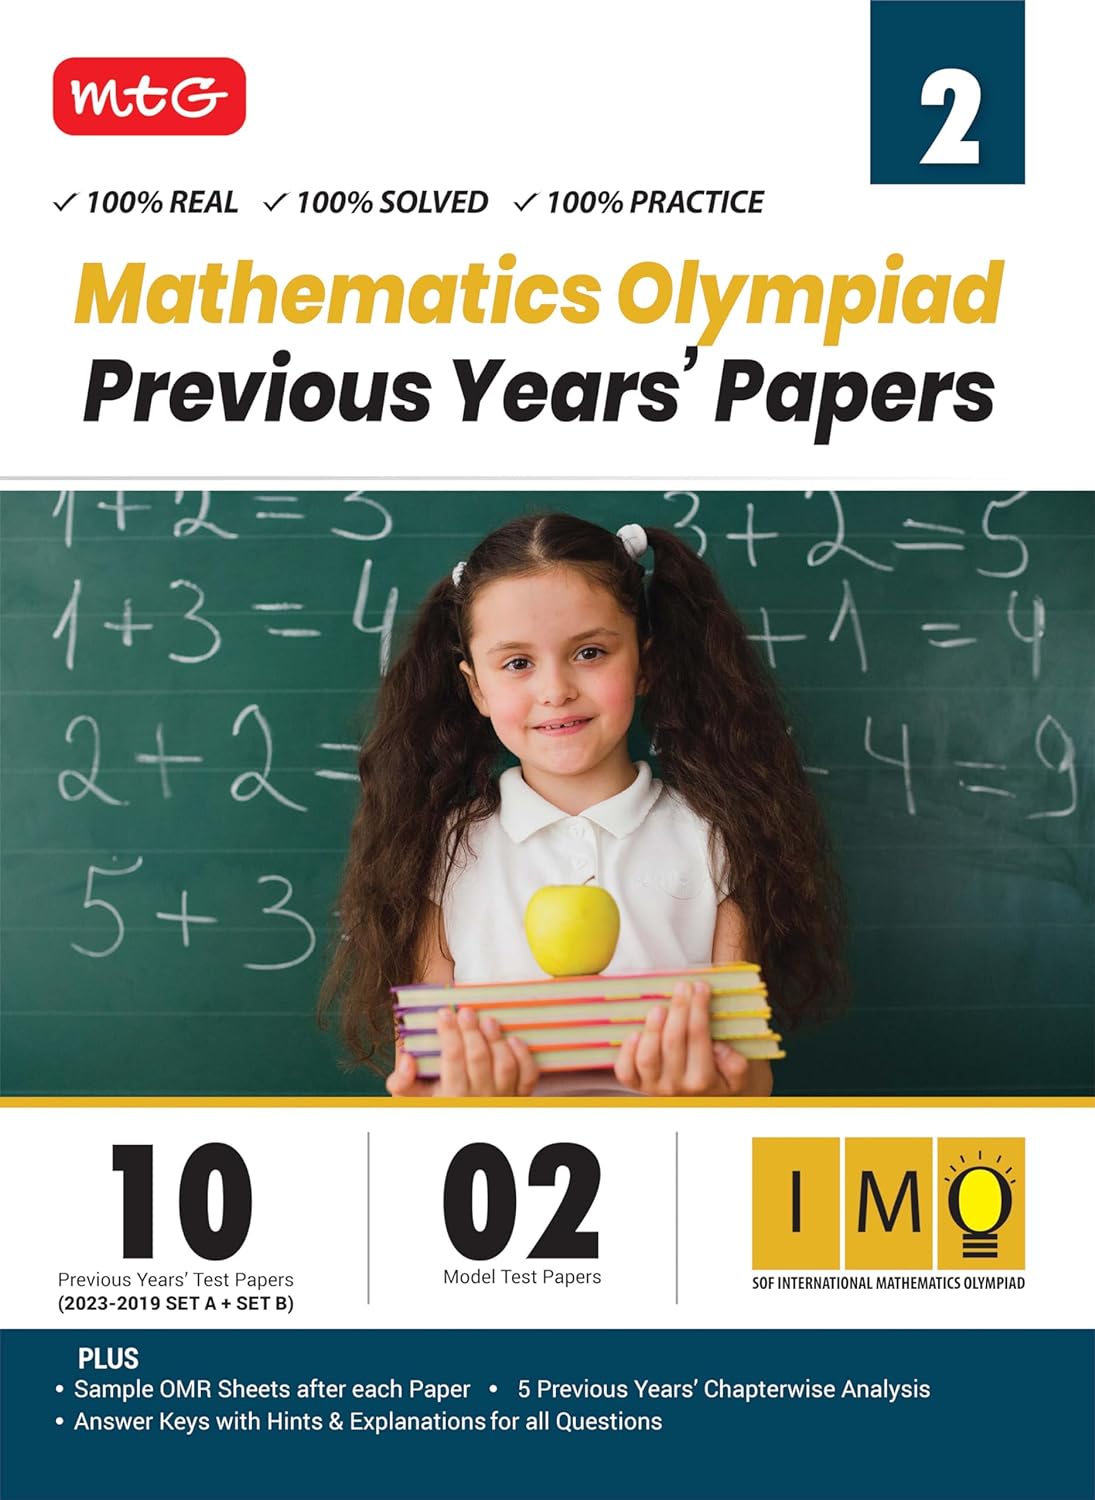 MTG MATHEMATICS OLYMPIAD PREVIOUS YEARS PAPERS 2